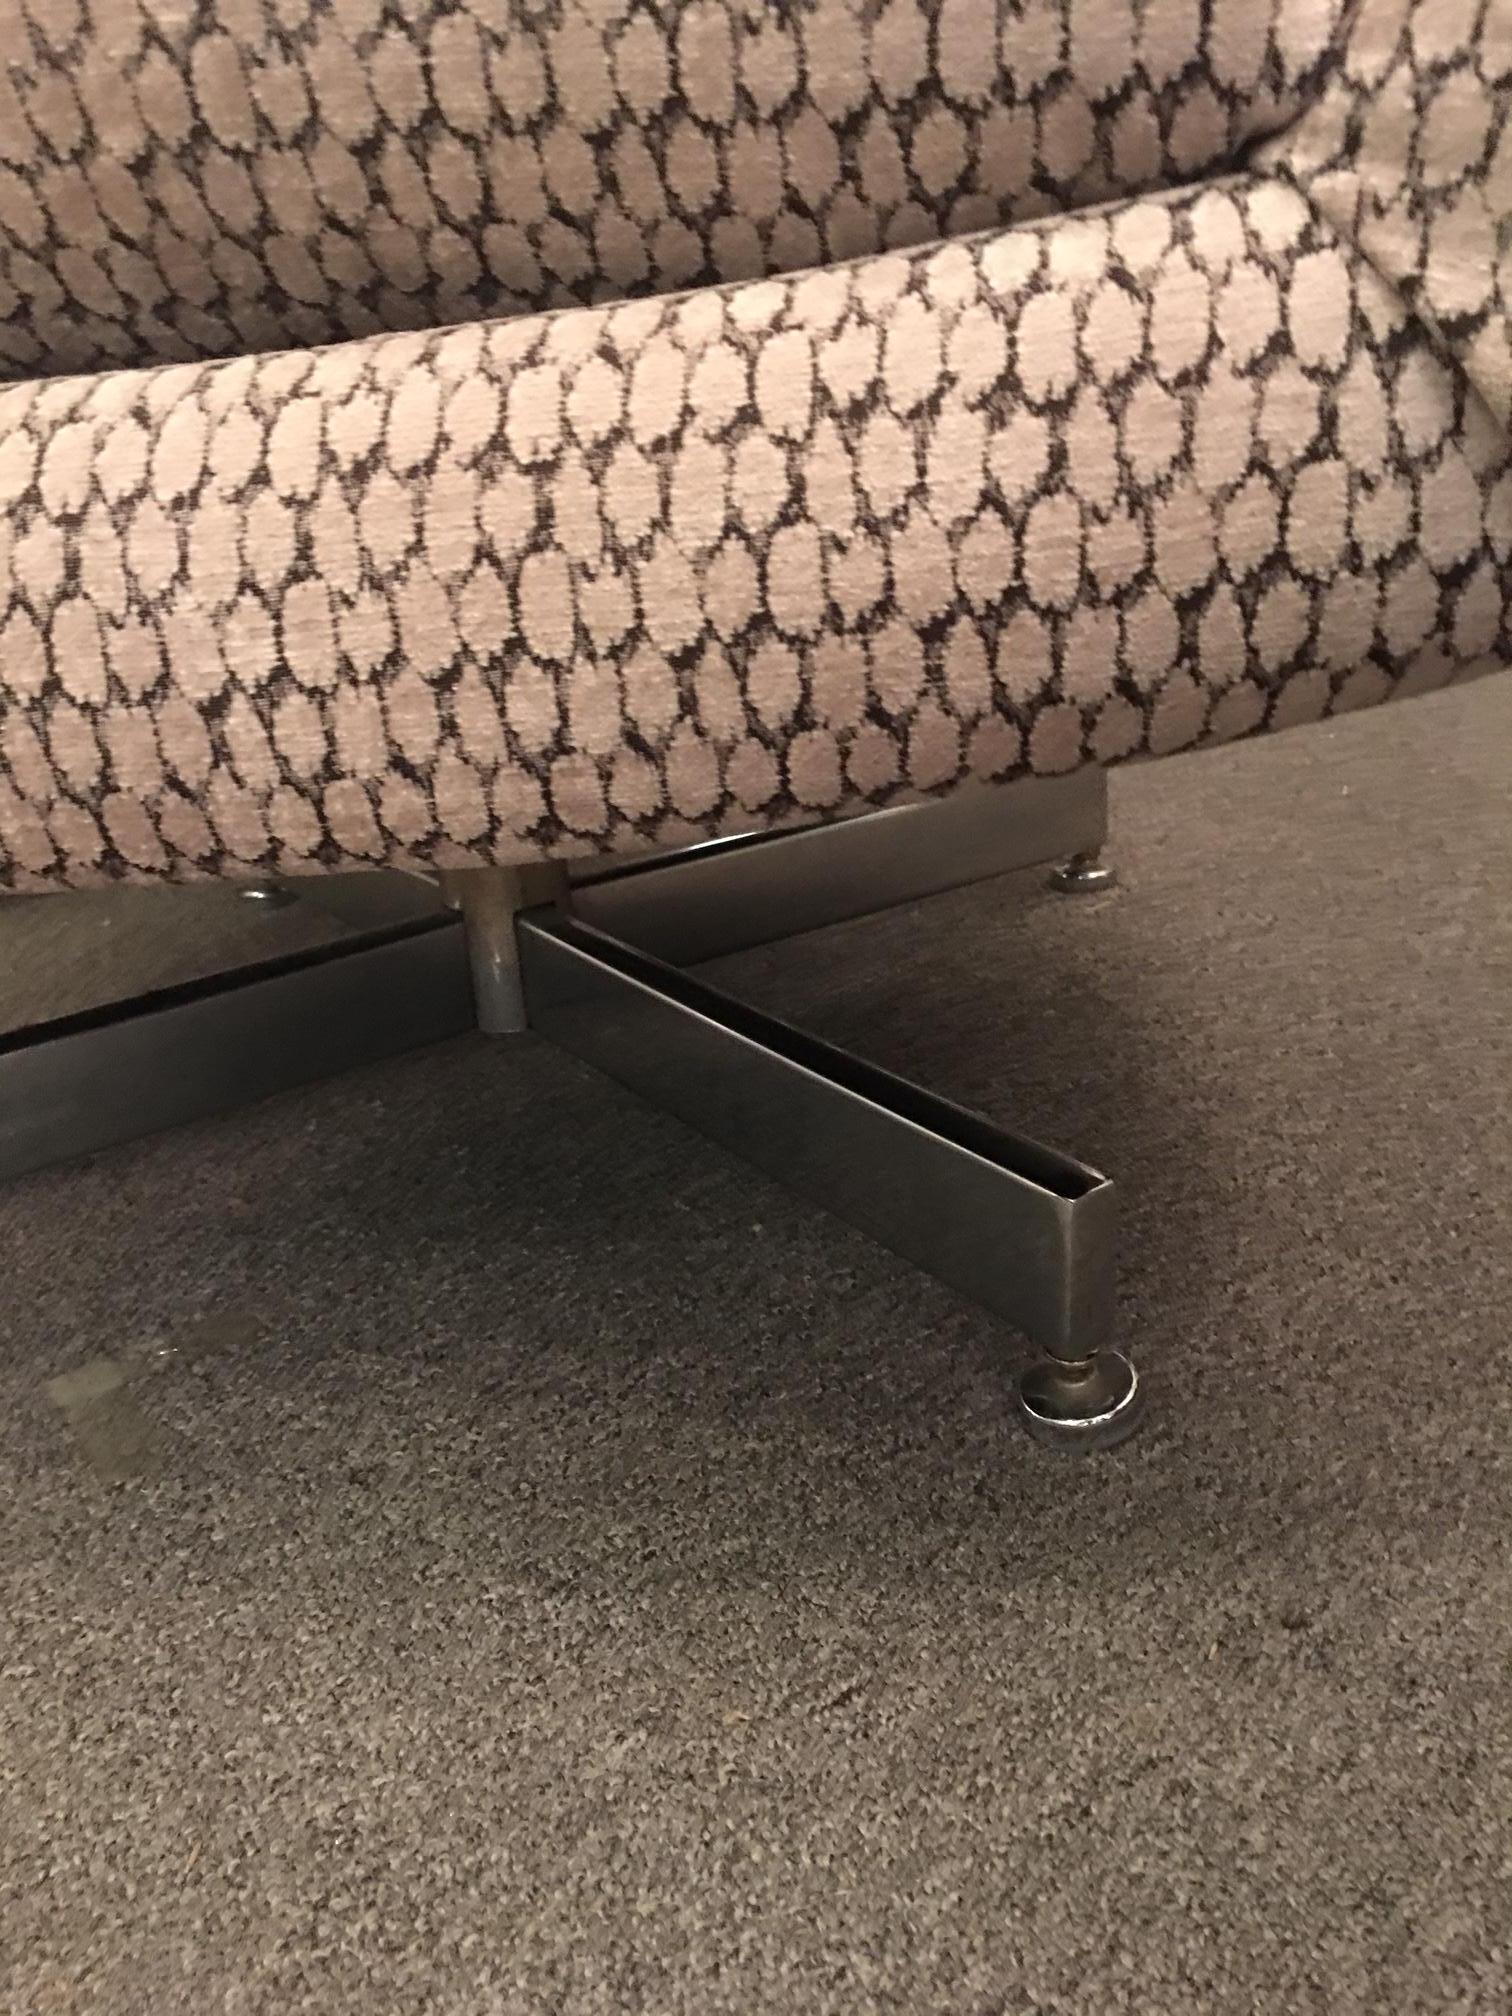 This midcentury chair has been newly upholstered in a soft and luxurious print that suggests and animal print but is really not. The colors are a soft beige backed with charcoal. Tufted back and sides. Excellent swivel mechanism in chrome. Note that